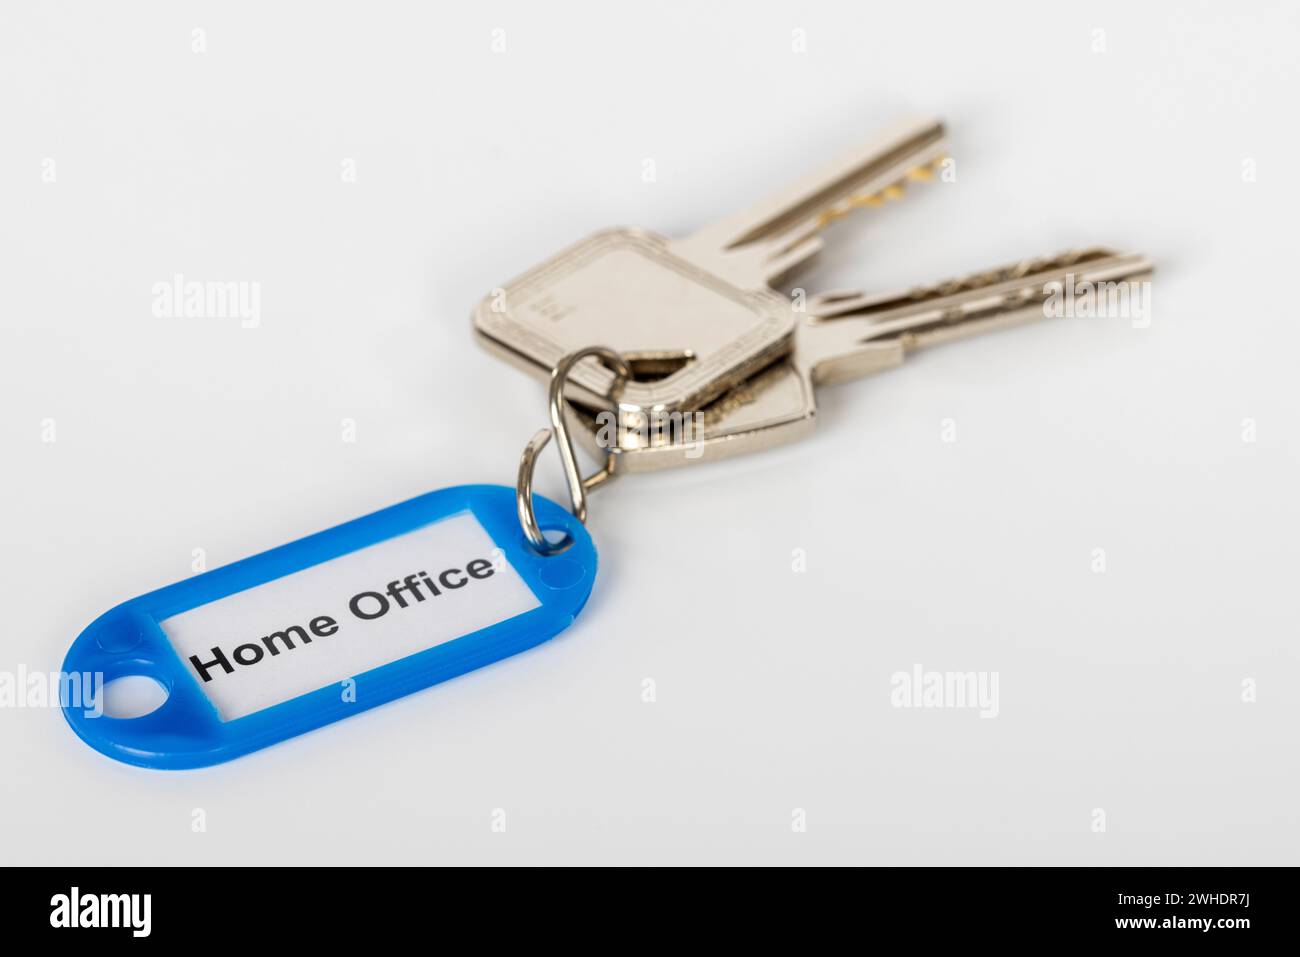 Key ring with blue key fob, labeled 'Home Office', dimple key, white background, Stock Photo